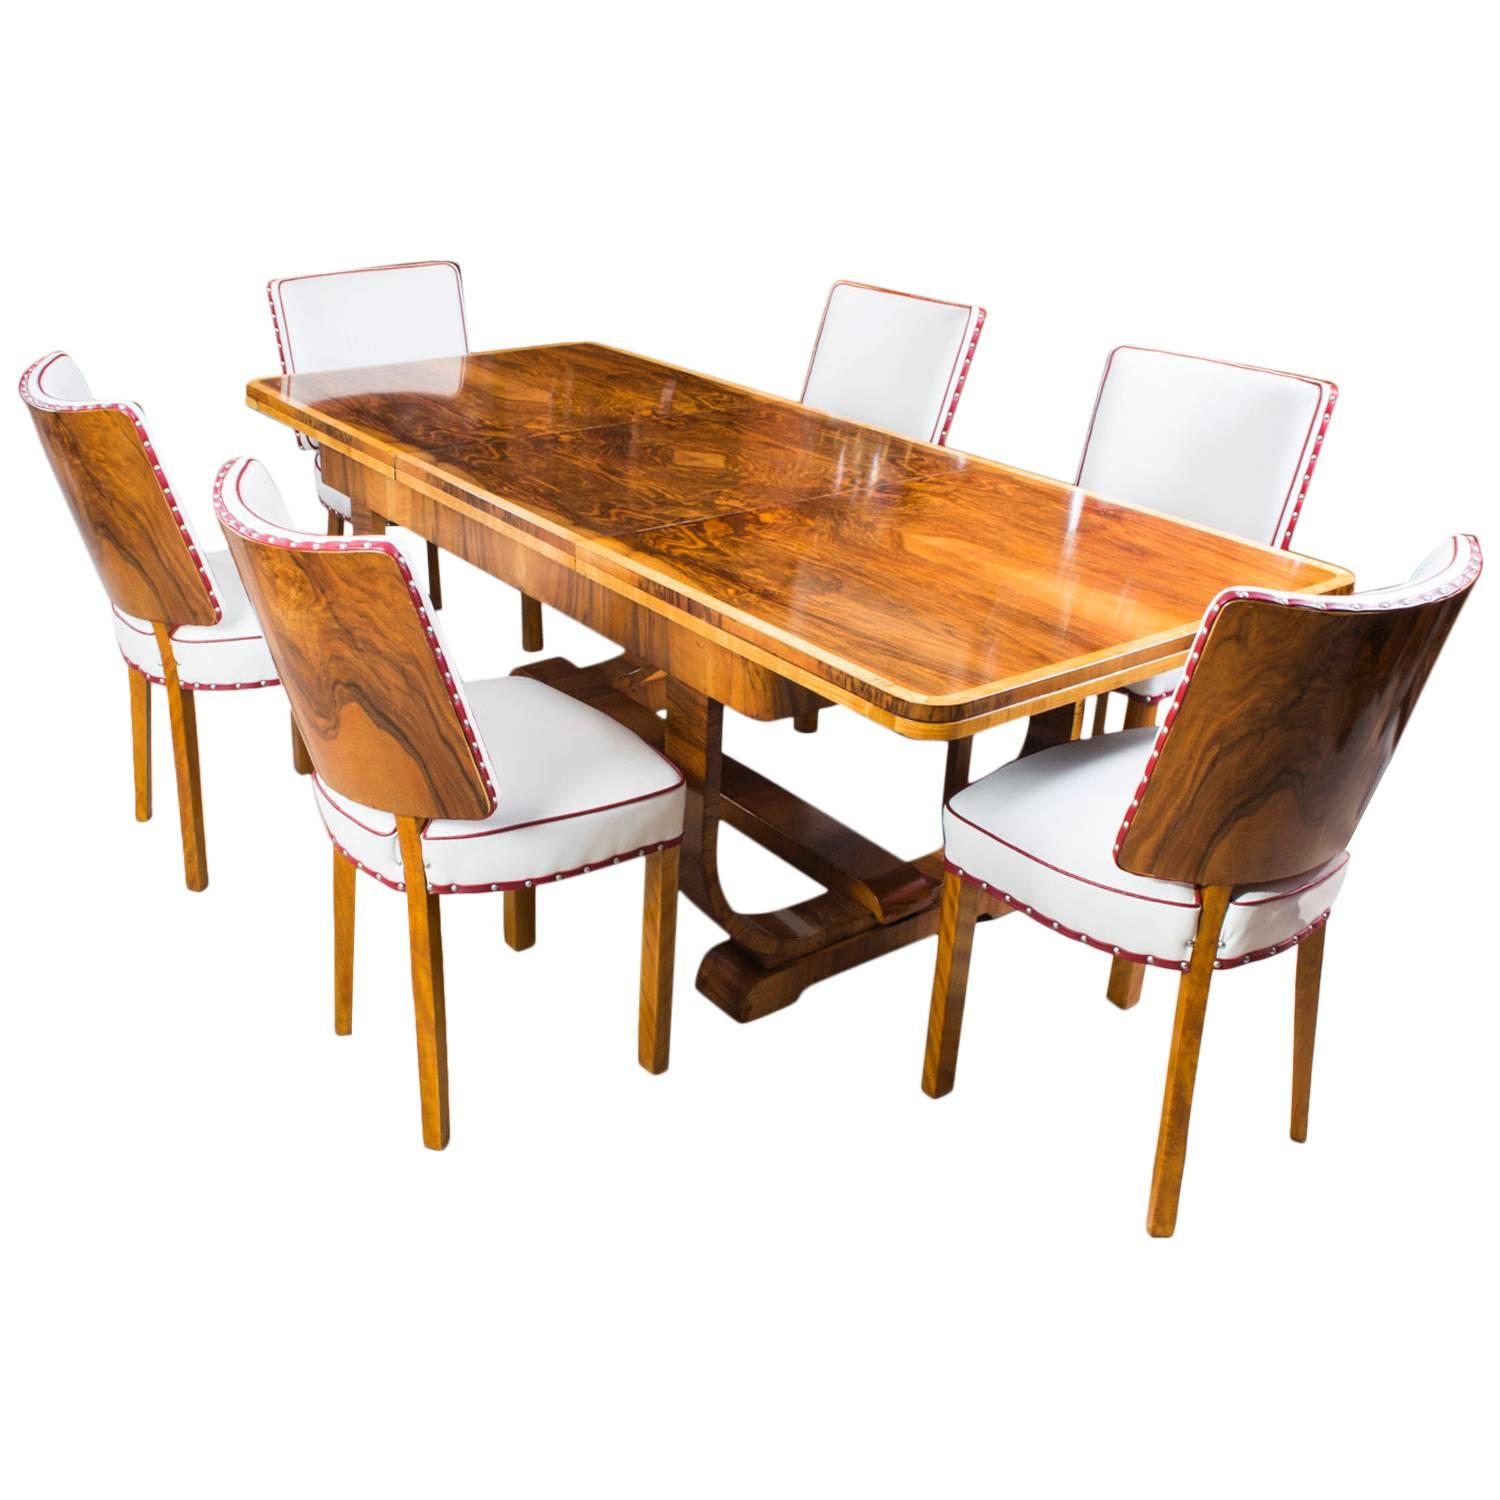 Antique Art Deco Burr Walnut Dining Table and Six Chairs, circa 1930